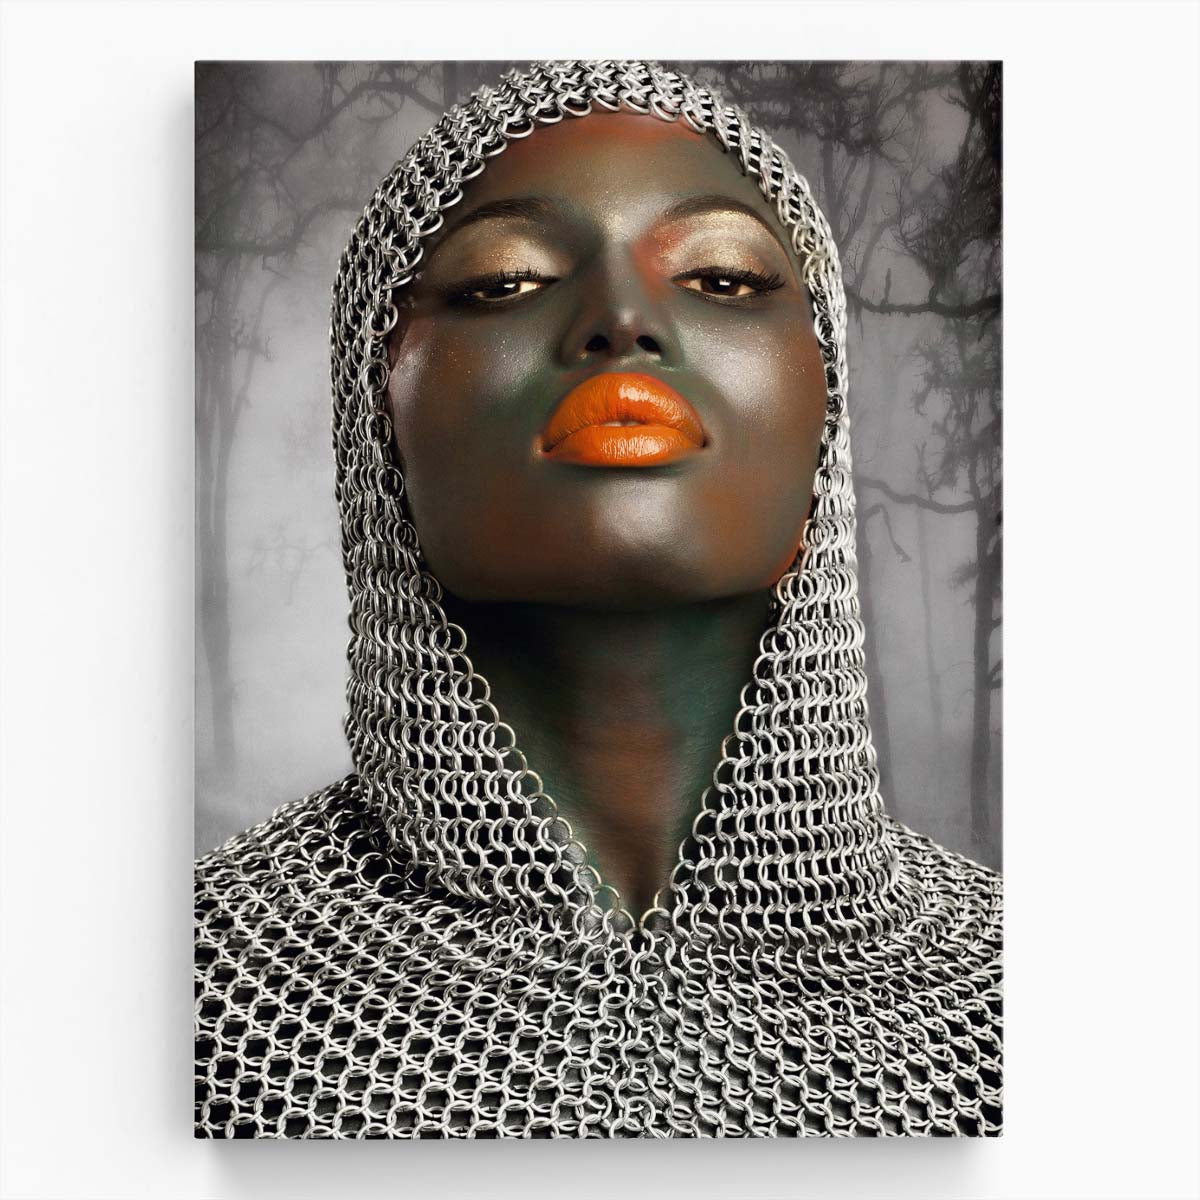 Medieval Warrior Woman Photography Mysterious Forest Chainmail Portrait by Luxuriance Designs, made in USA